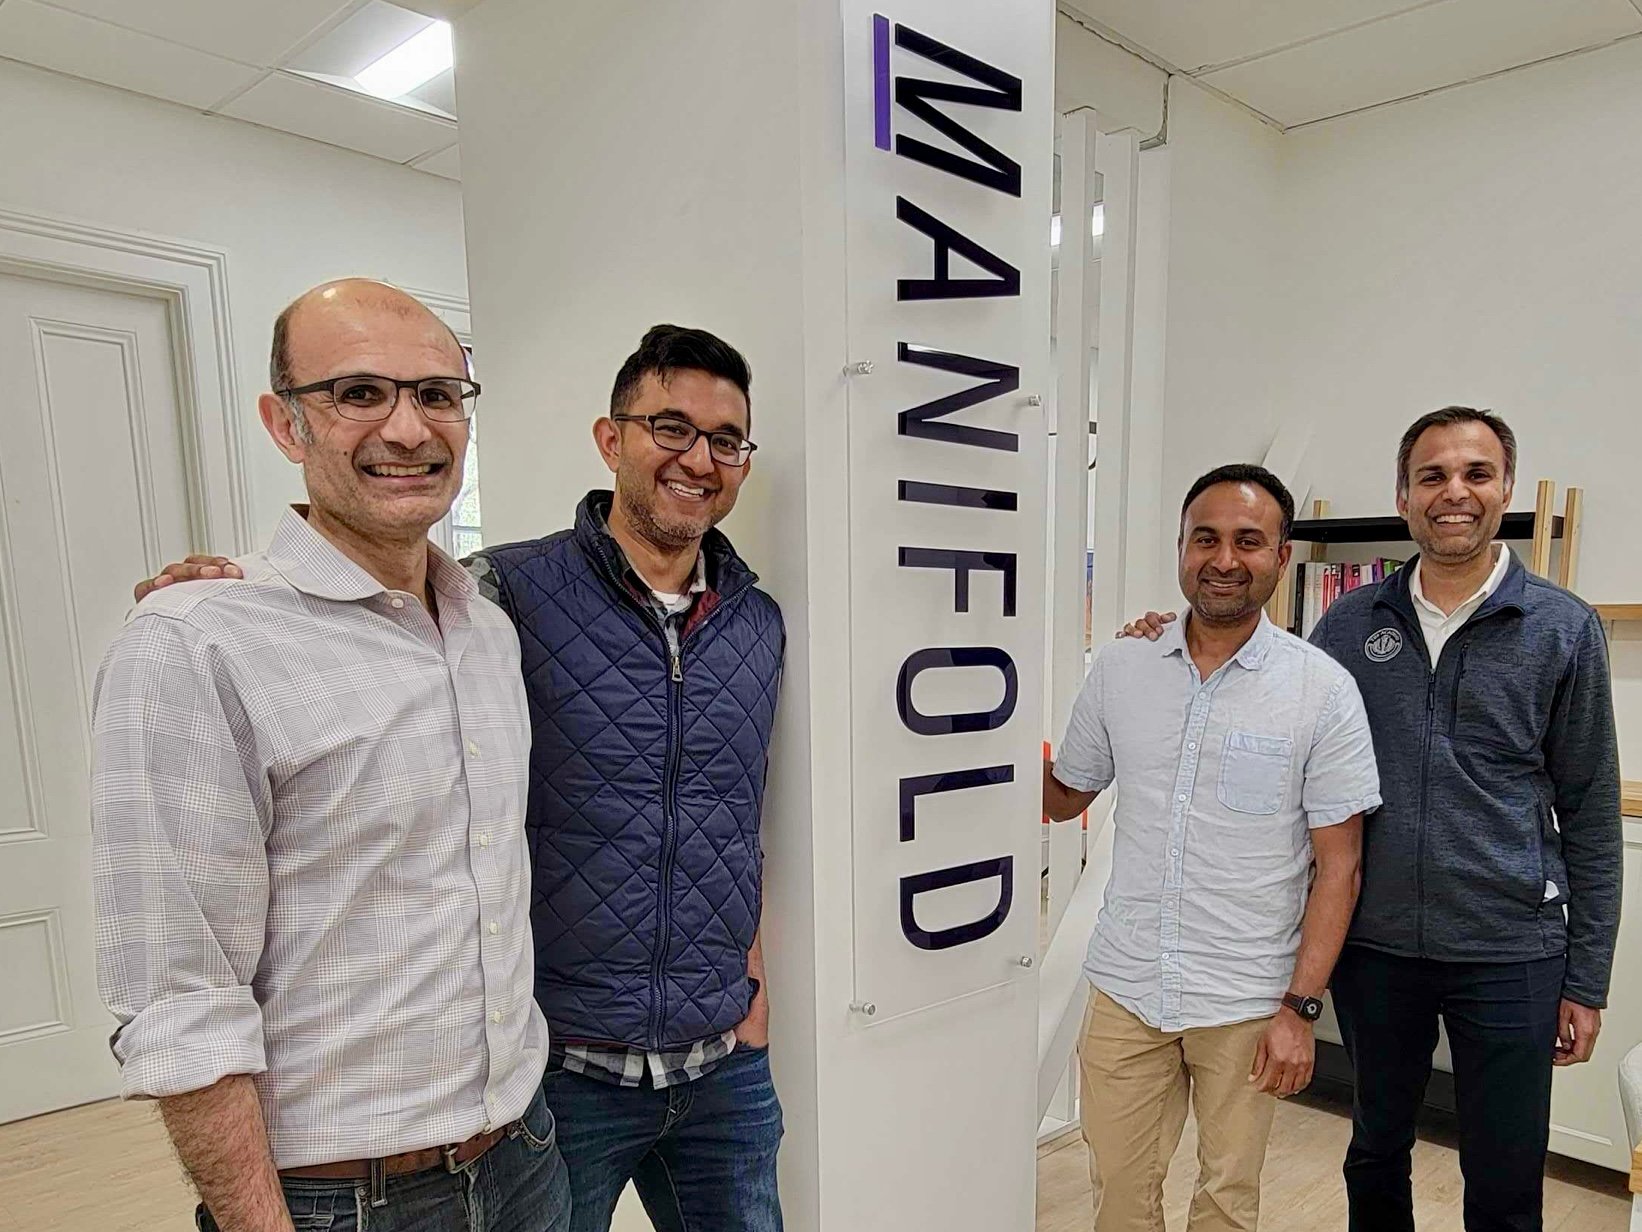 Startup Manifold secures $15M for its AI-based clinical research platform